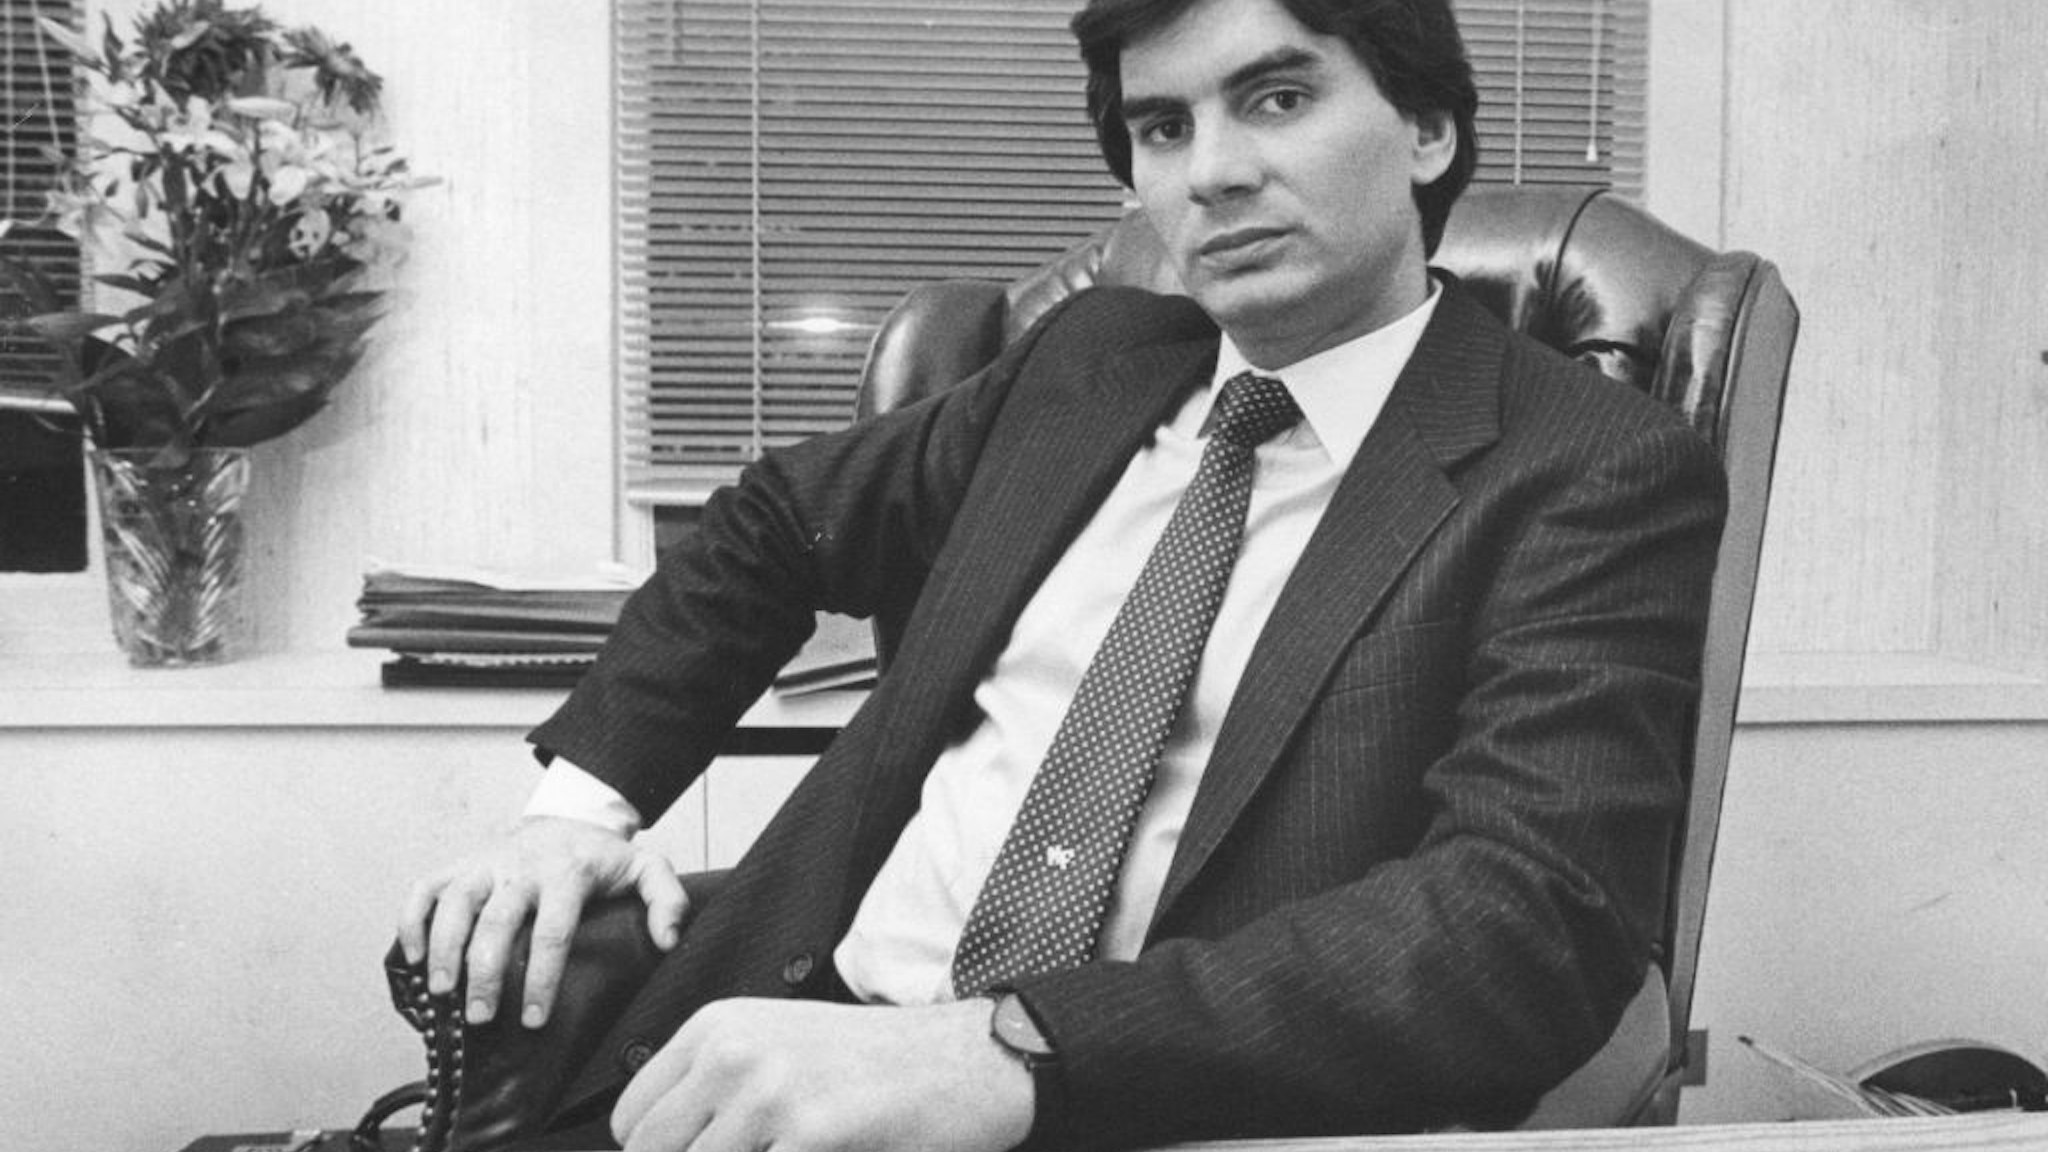 New York, N.Y.: Michael Franzese, son of organized crime figure Sonny Franzese, in a Manhattan office, on January 29, 1985. (Photo by Jim Cummins/Newsday RM via Getty Images)